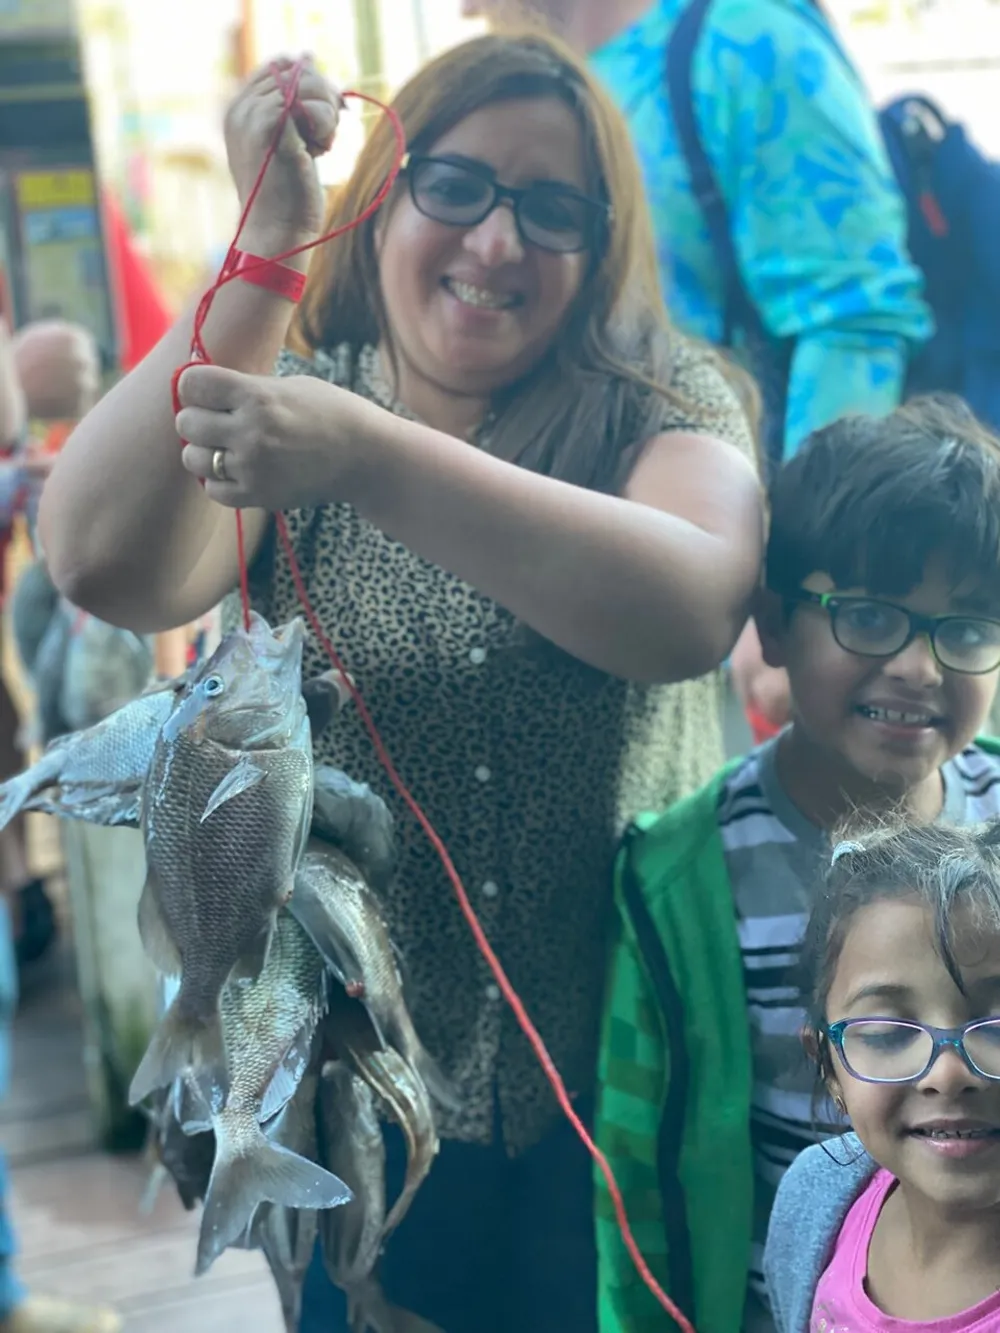 A smiling woman proudly displays several fish she appears to have caught with two cheerful kids looking on